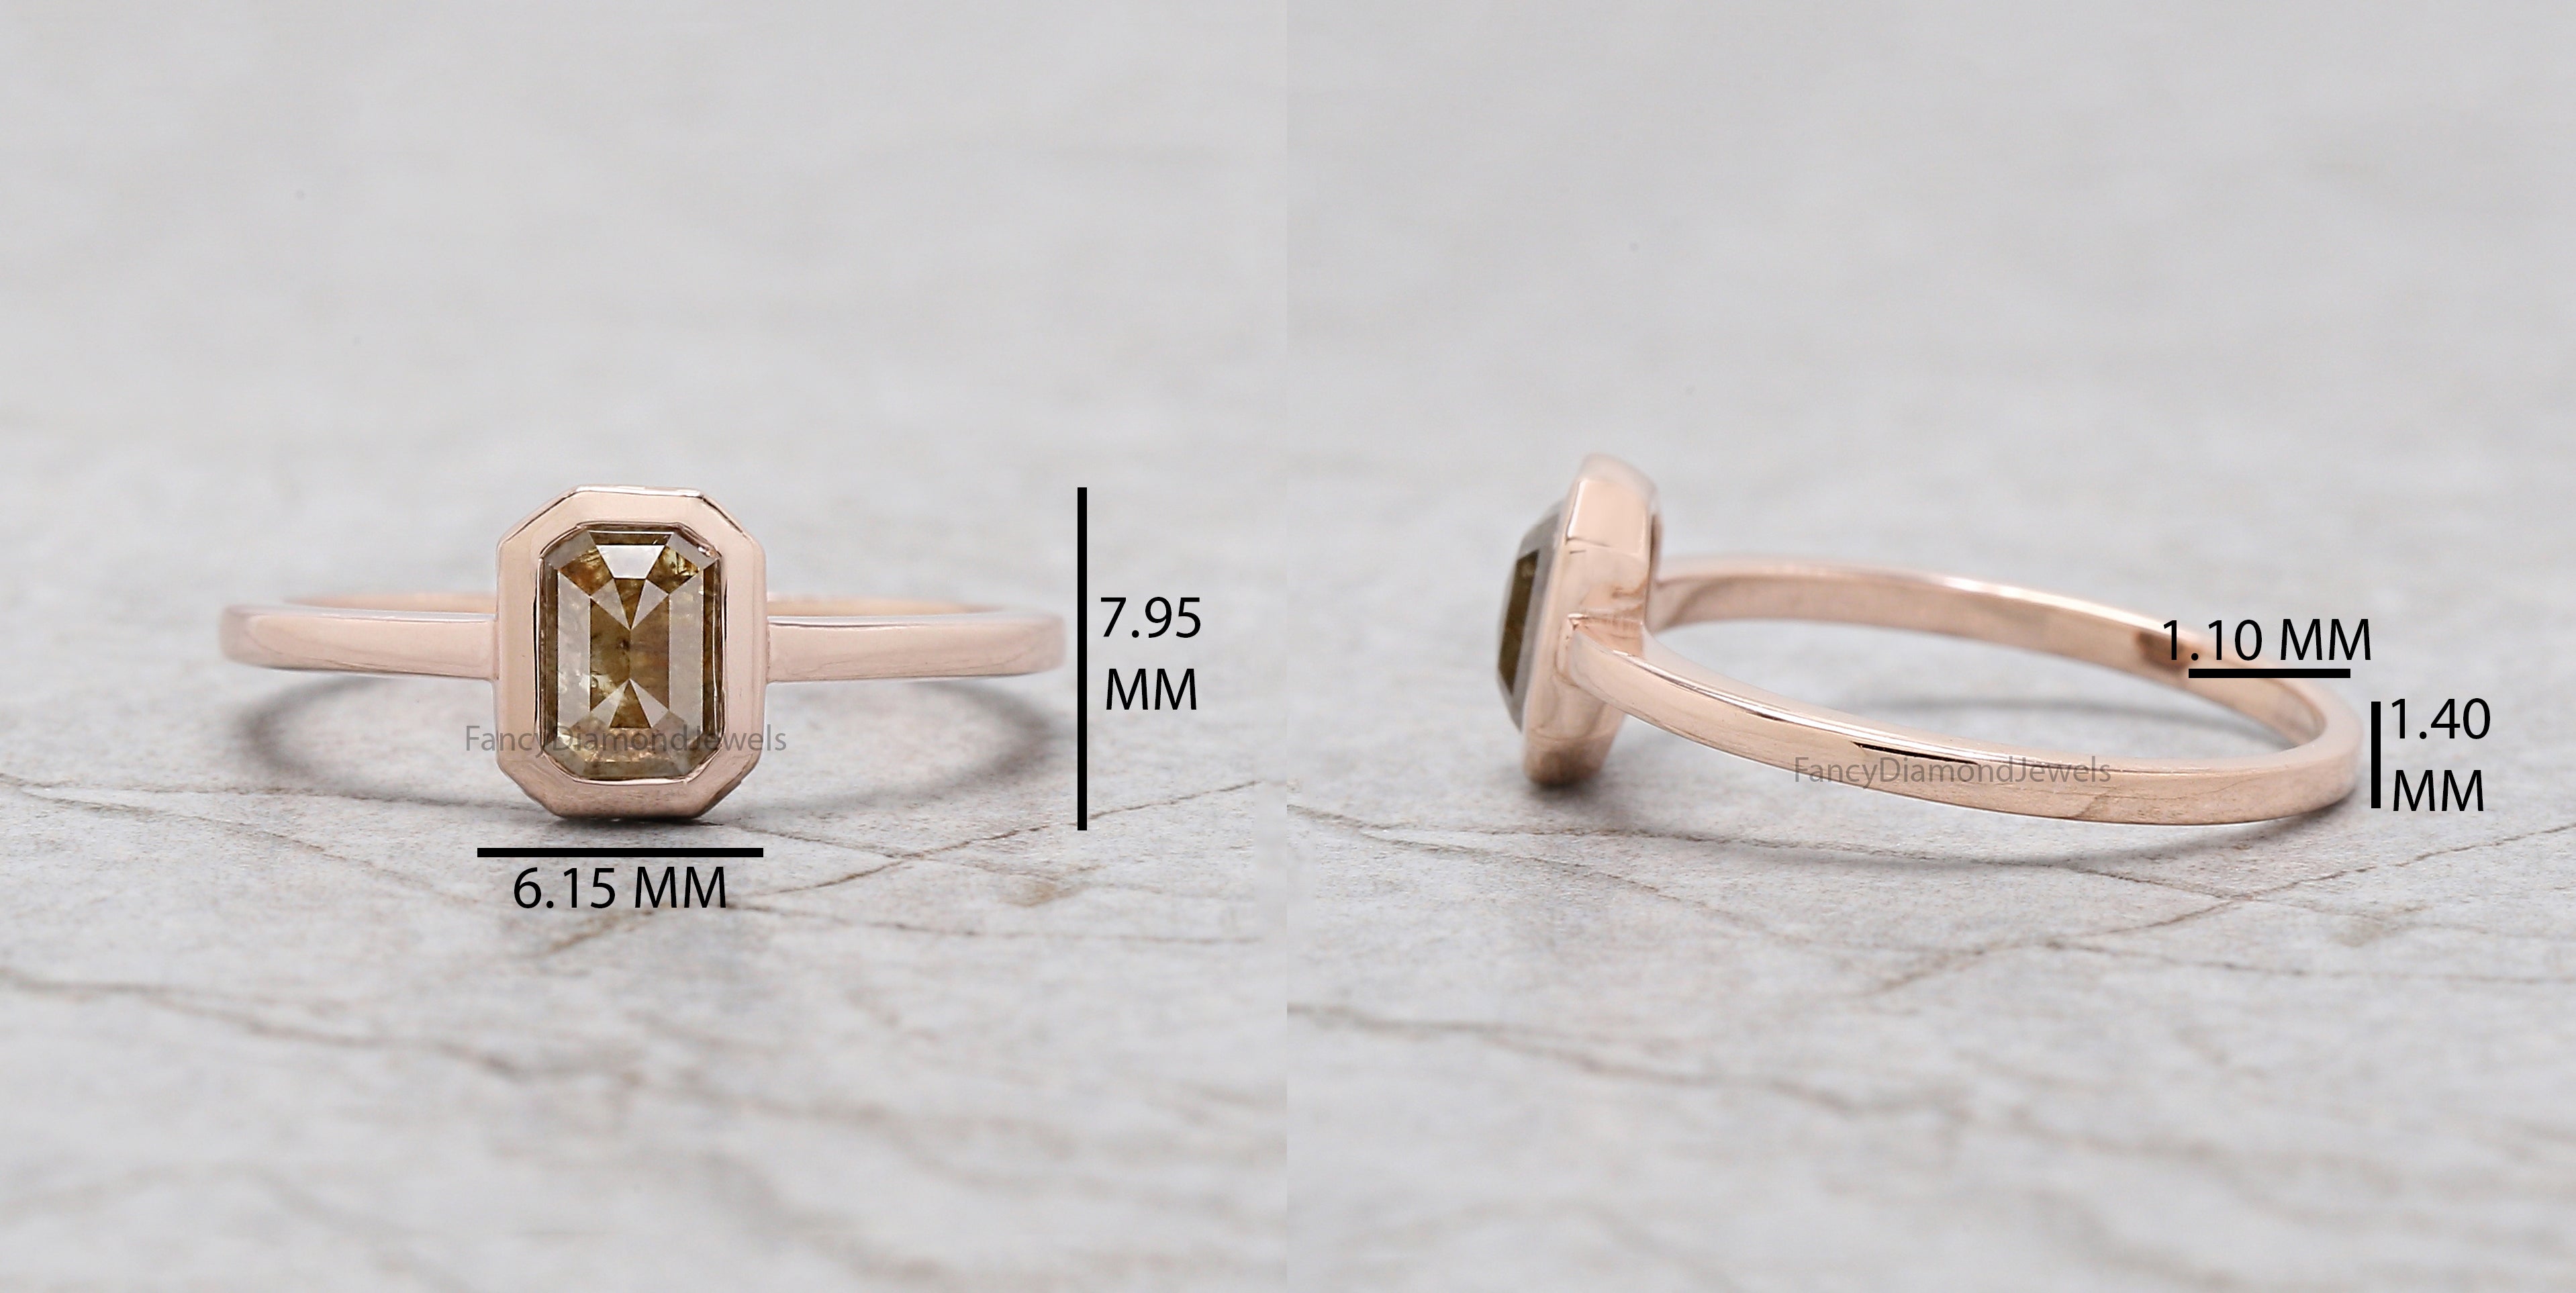 Emerald Cut Brown Color Diamond Ring 0.71 Ct 6.35 MM Emerald Shape Diamond Ring 14K Rose Gold Silver Engagement Ring Gift For Her QL496